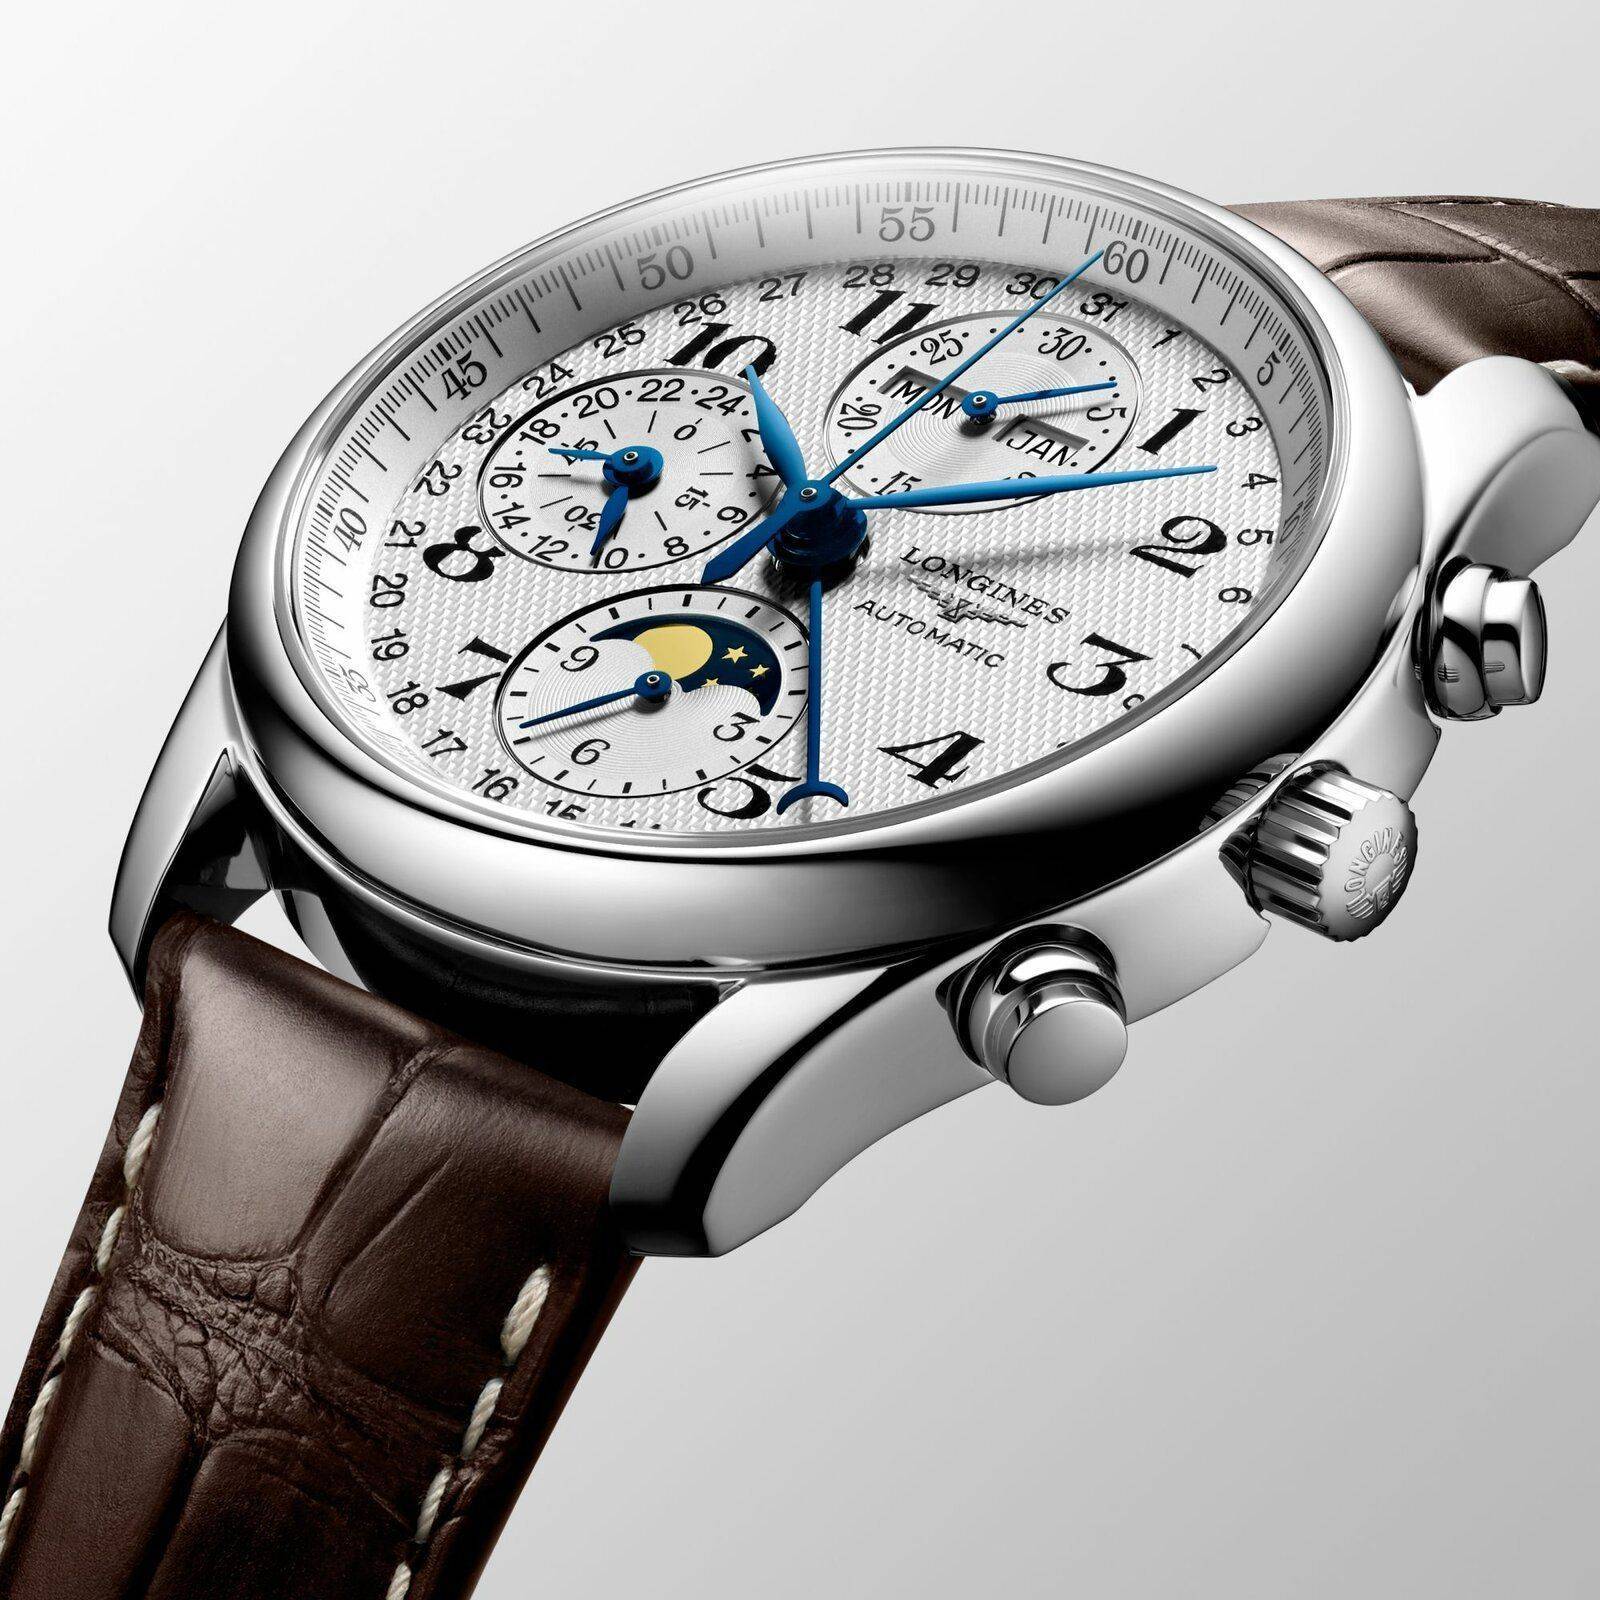 the-longines-master-collection-l2-673-4-78-3-detailed-view-2000x2000-3.jpg